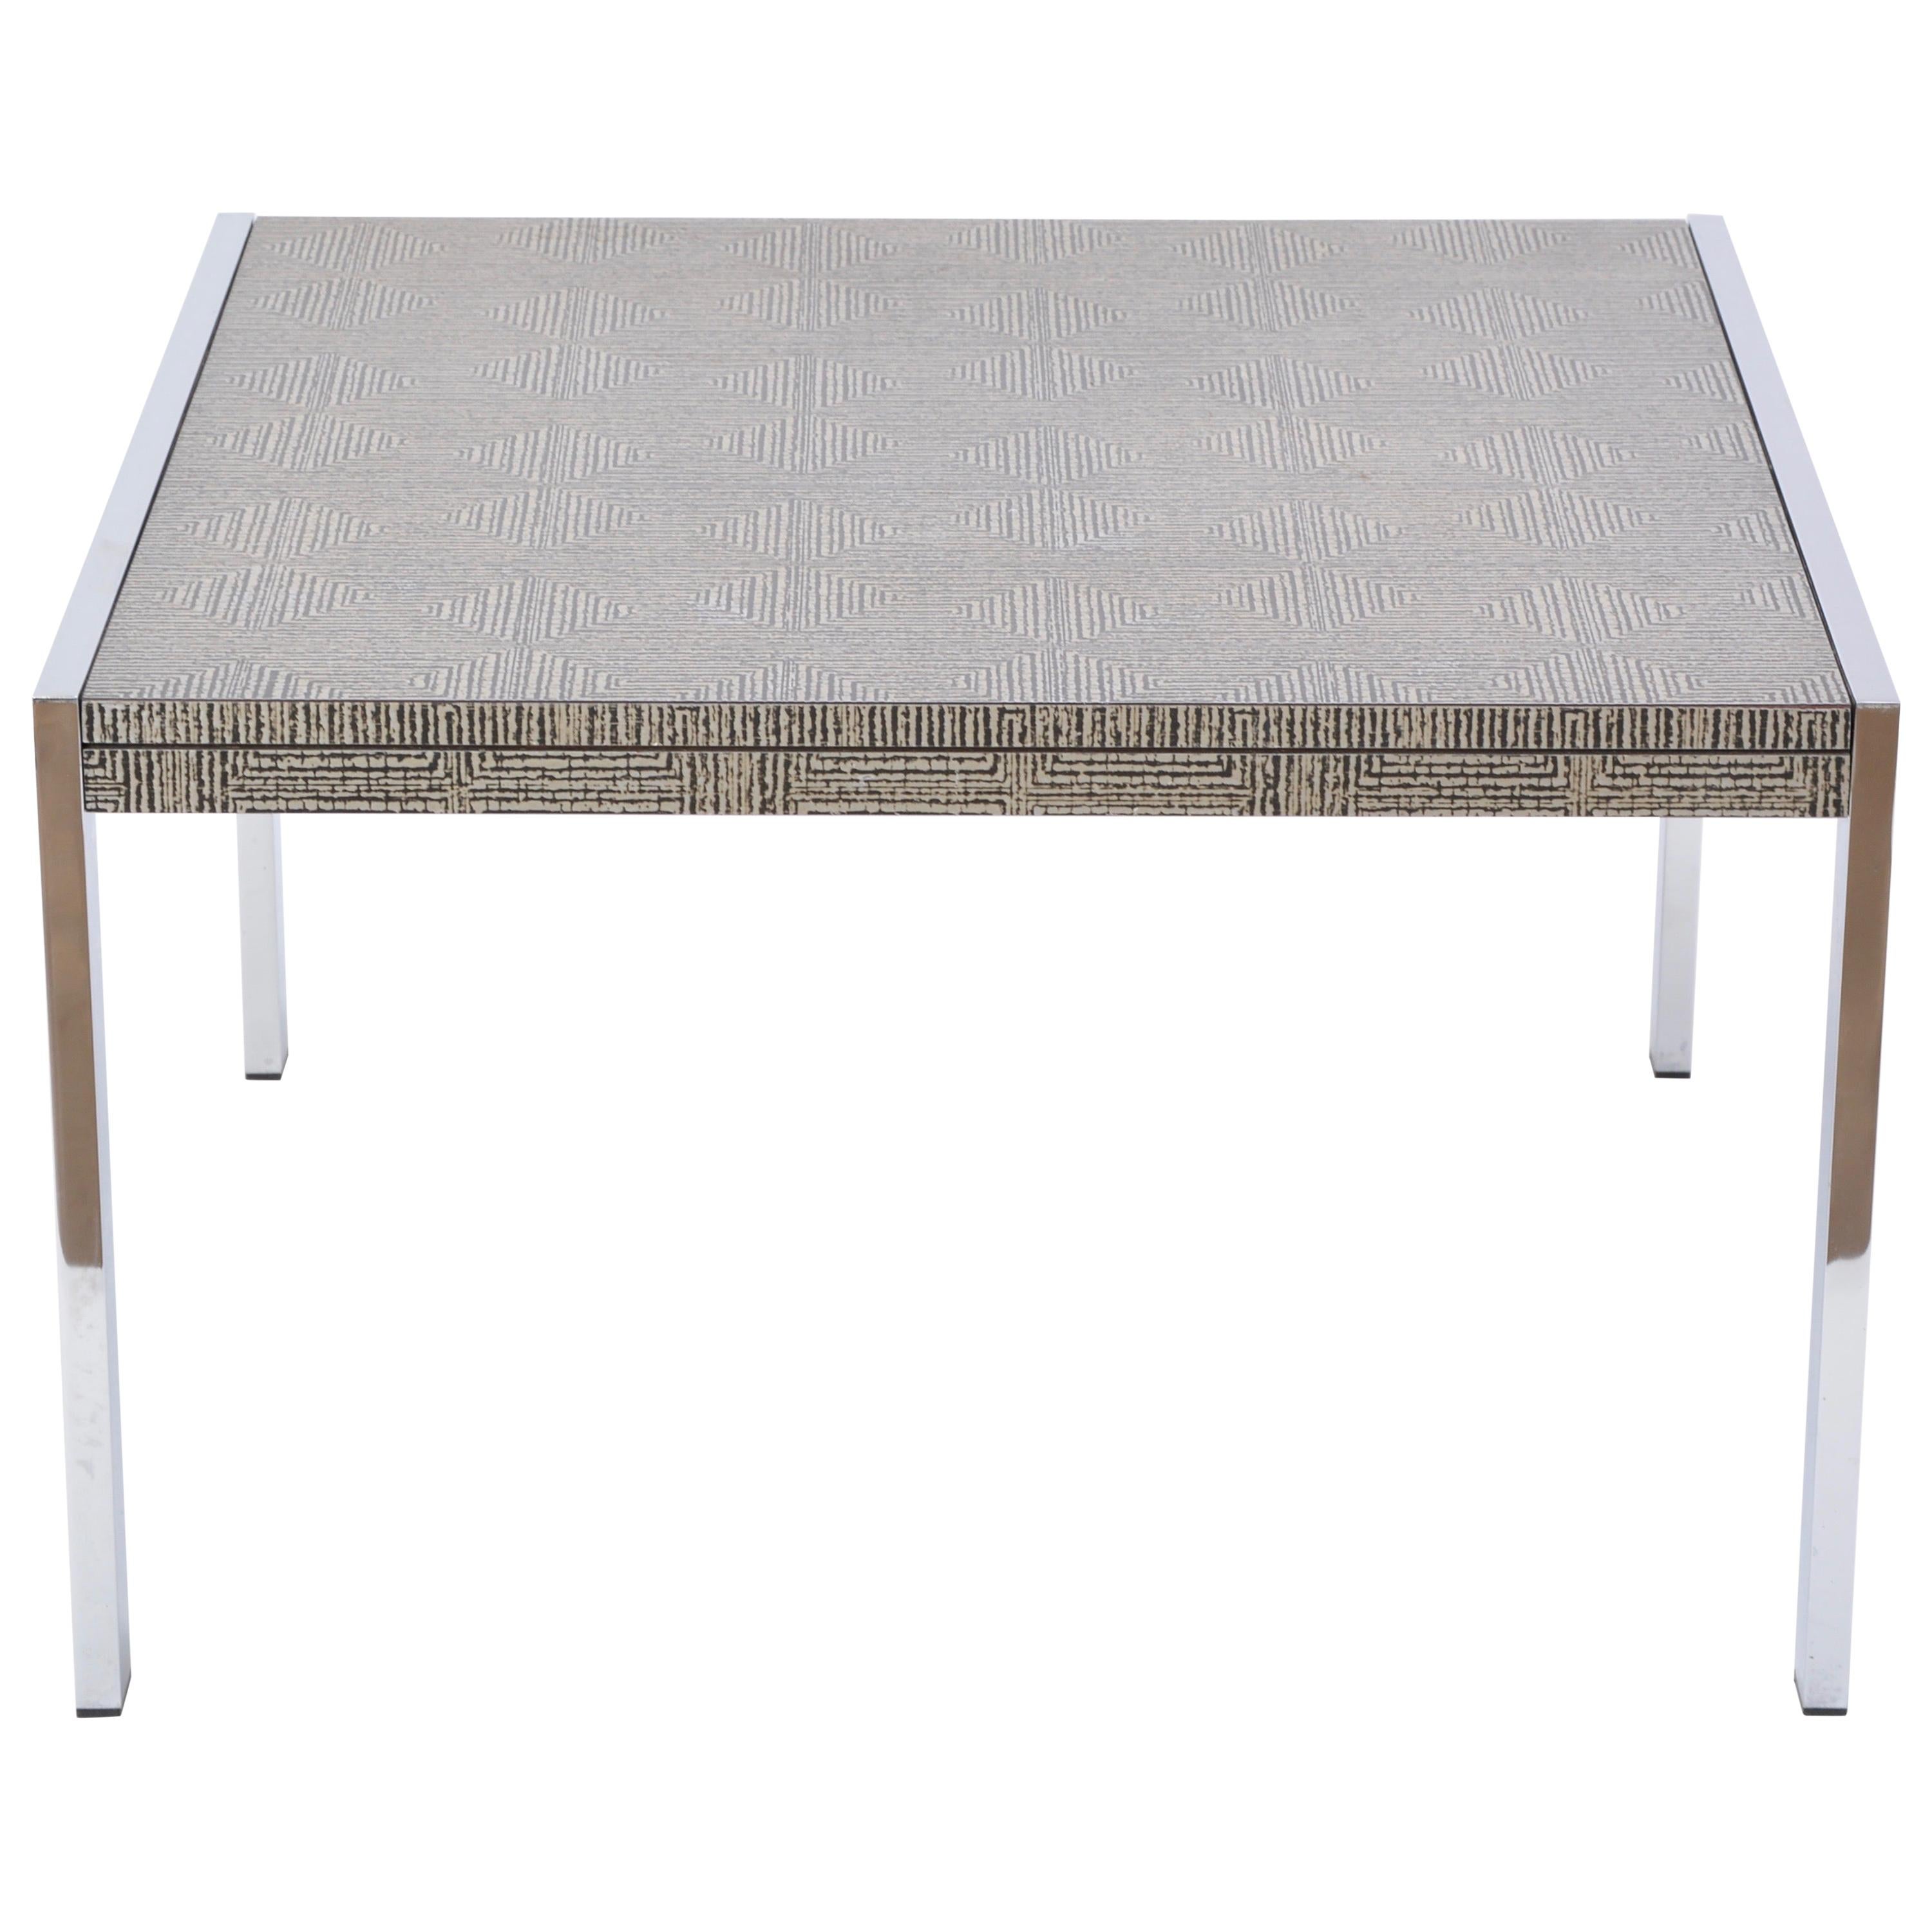 Mid-Century Modern Steel and Aluminium Coffee Table with Graphic Meander Pattern For Sale